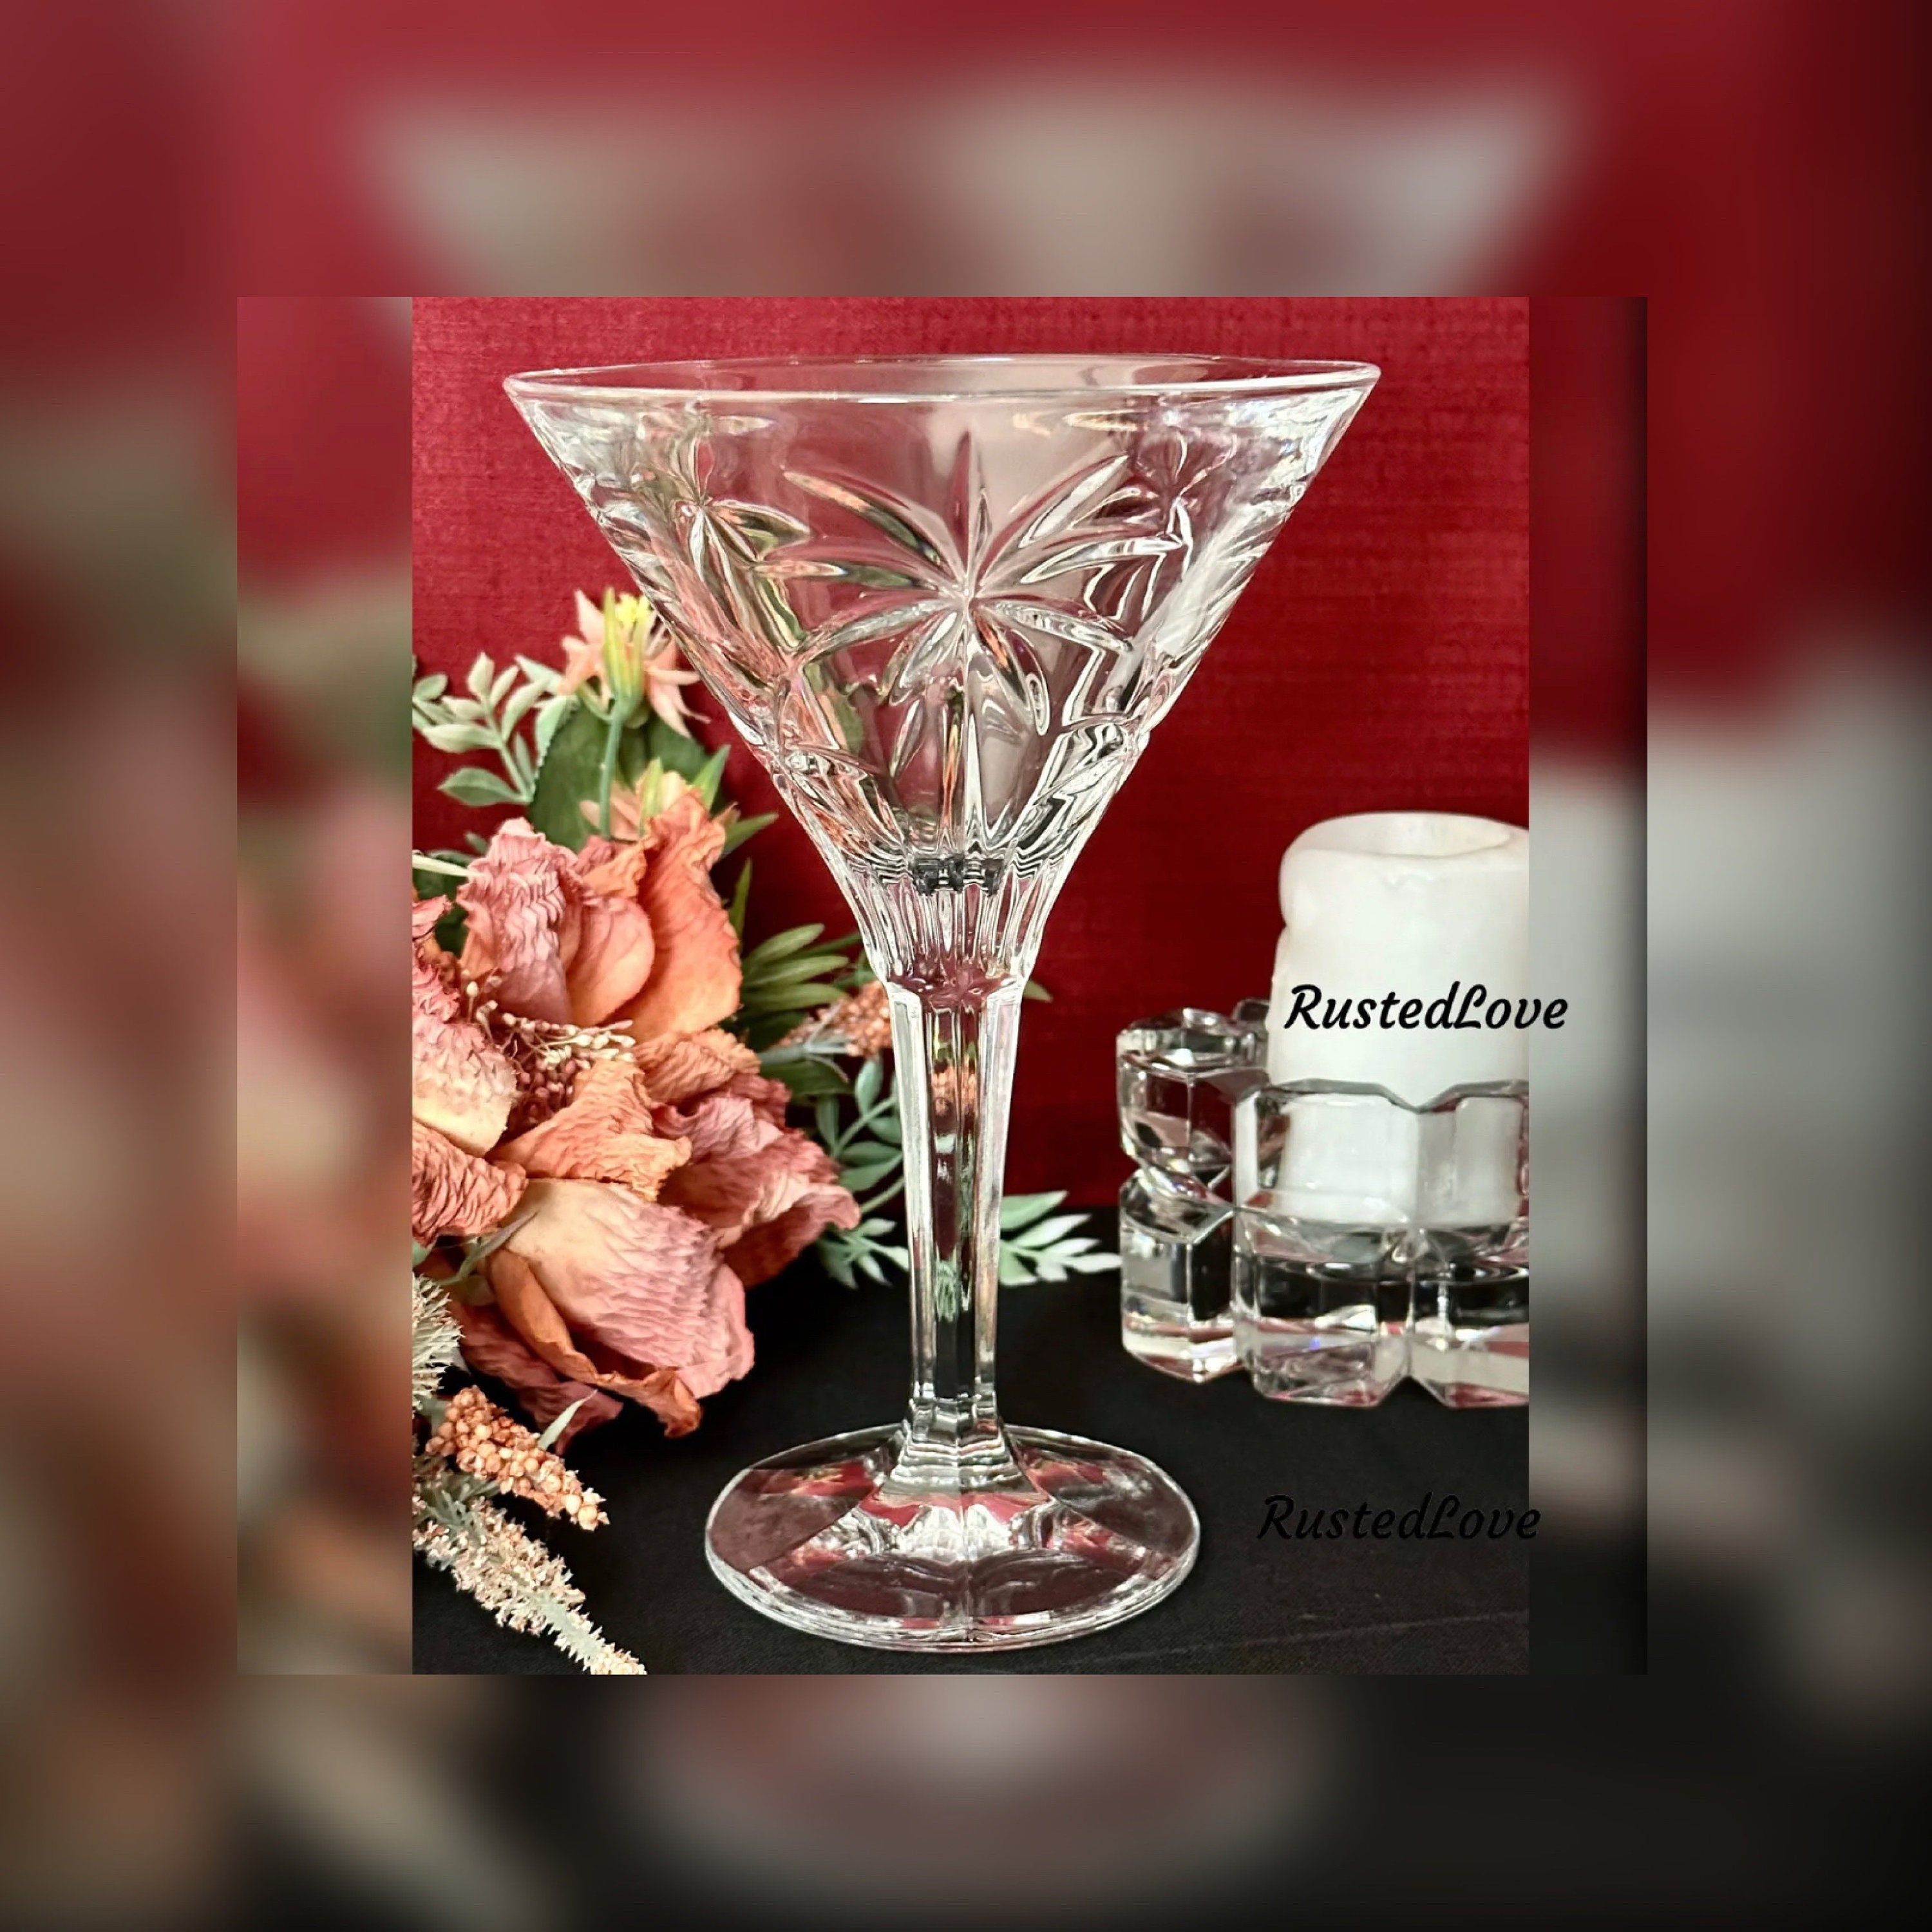 Homeford Plastic Large Martini Glass Disposable Cup, 18-Inch